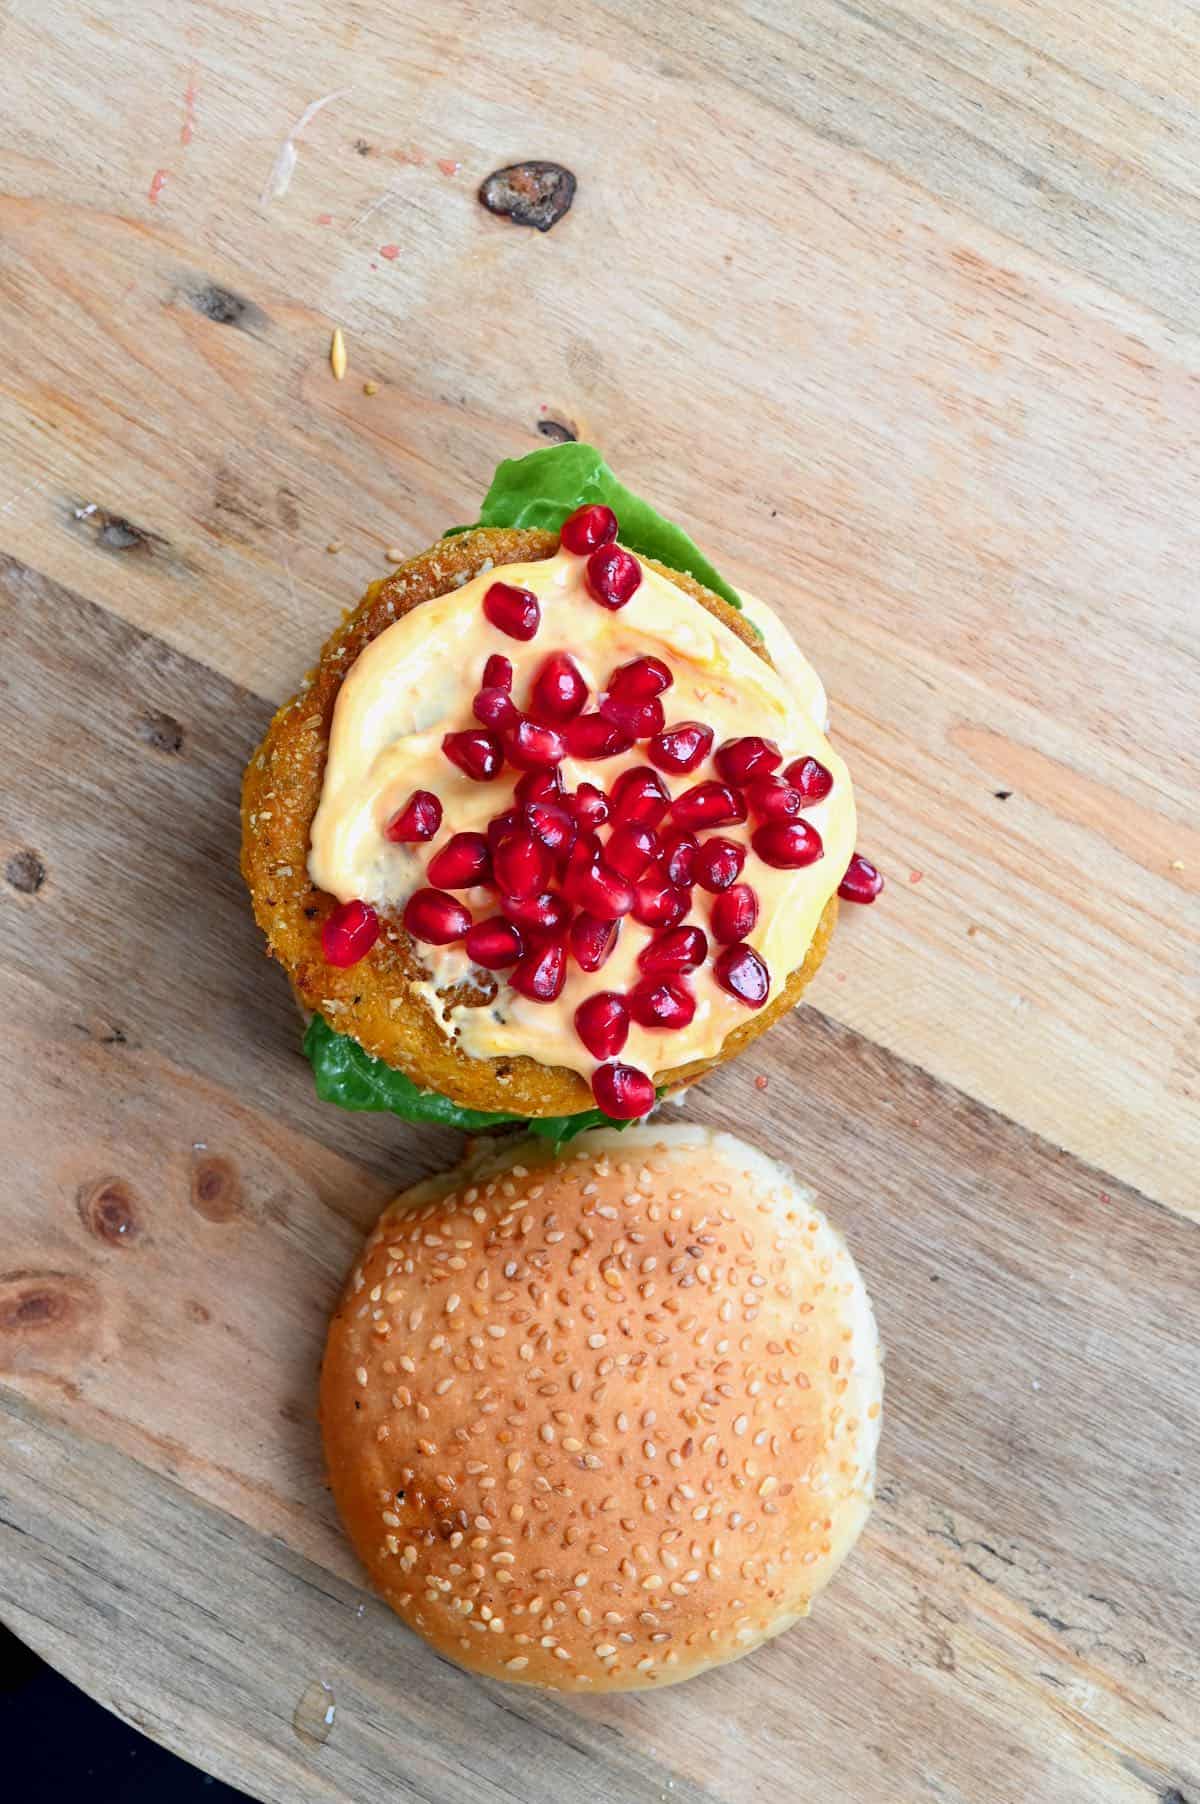 Assembling a burger with added spicy mayo and pomegranate seeds